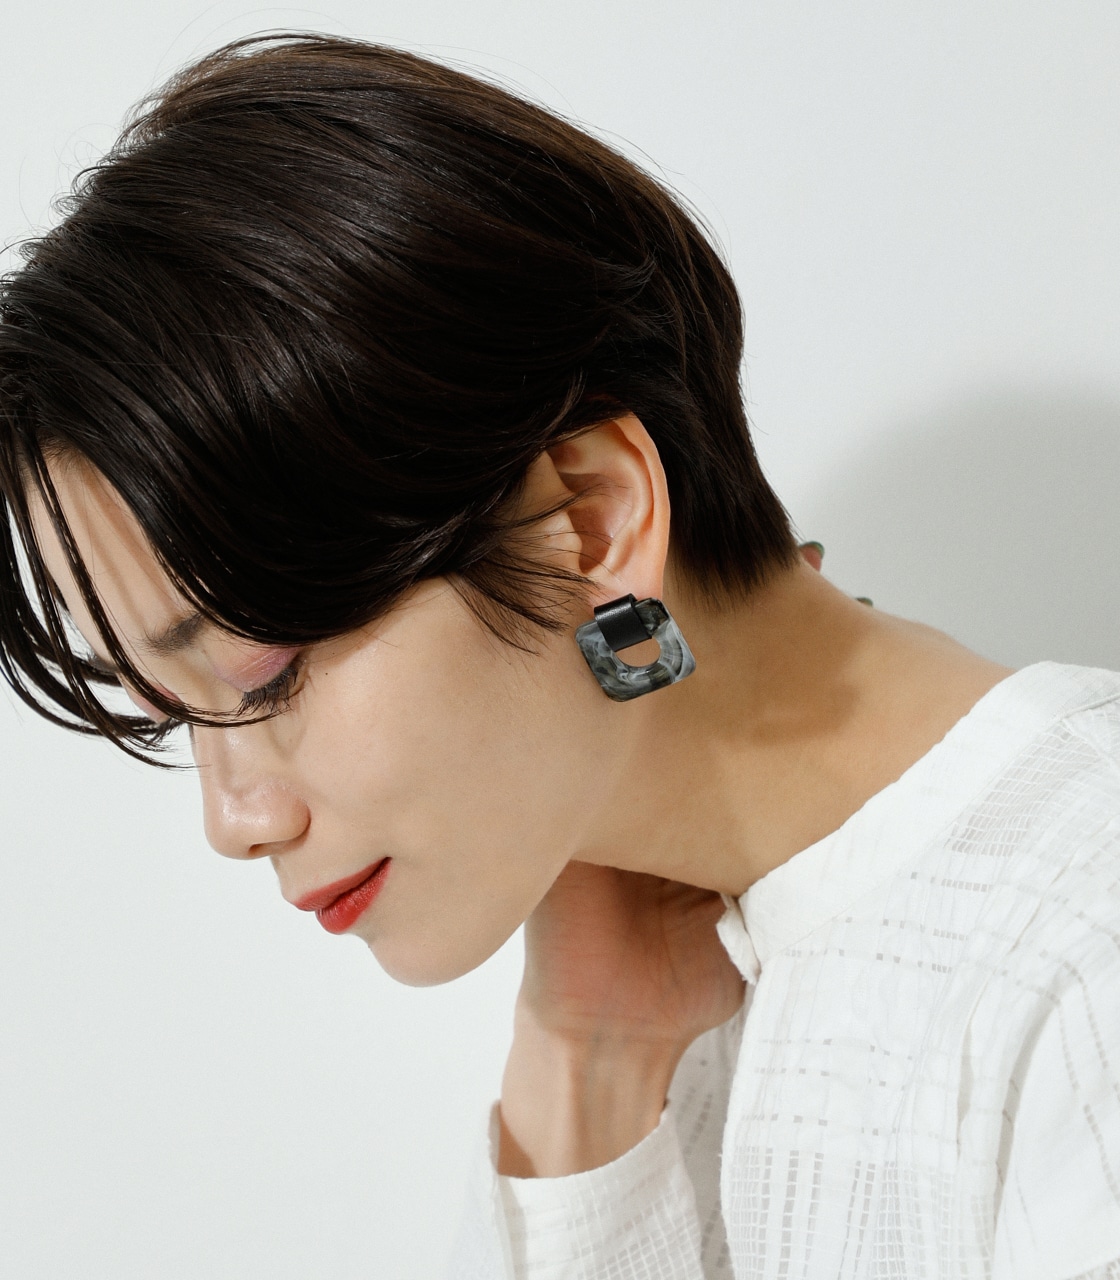 LEATHER×MARBLE EARRINGS/レザー×マーブルピアス 詳細画像 柄GRY 7